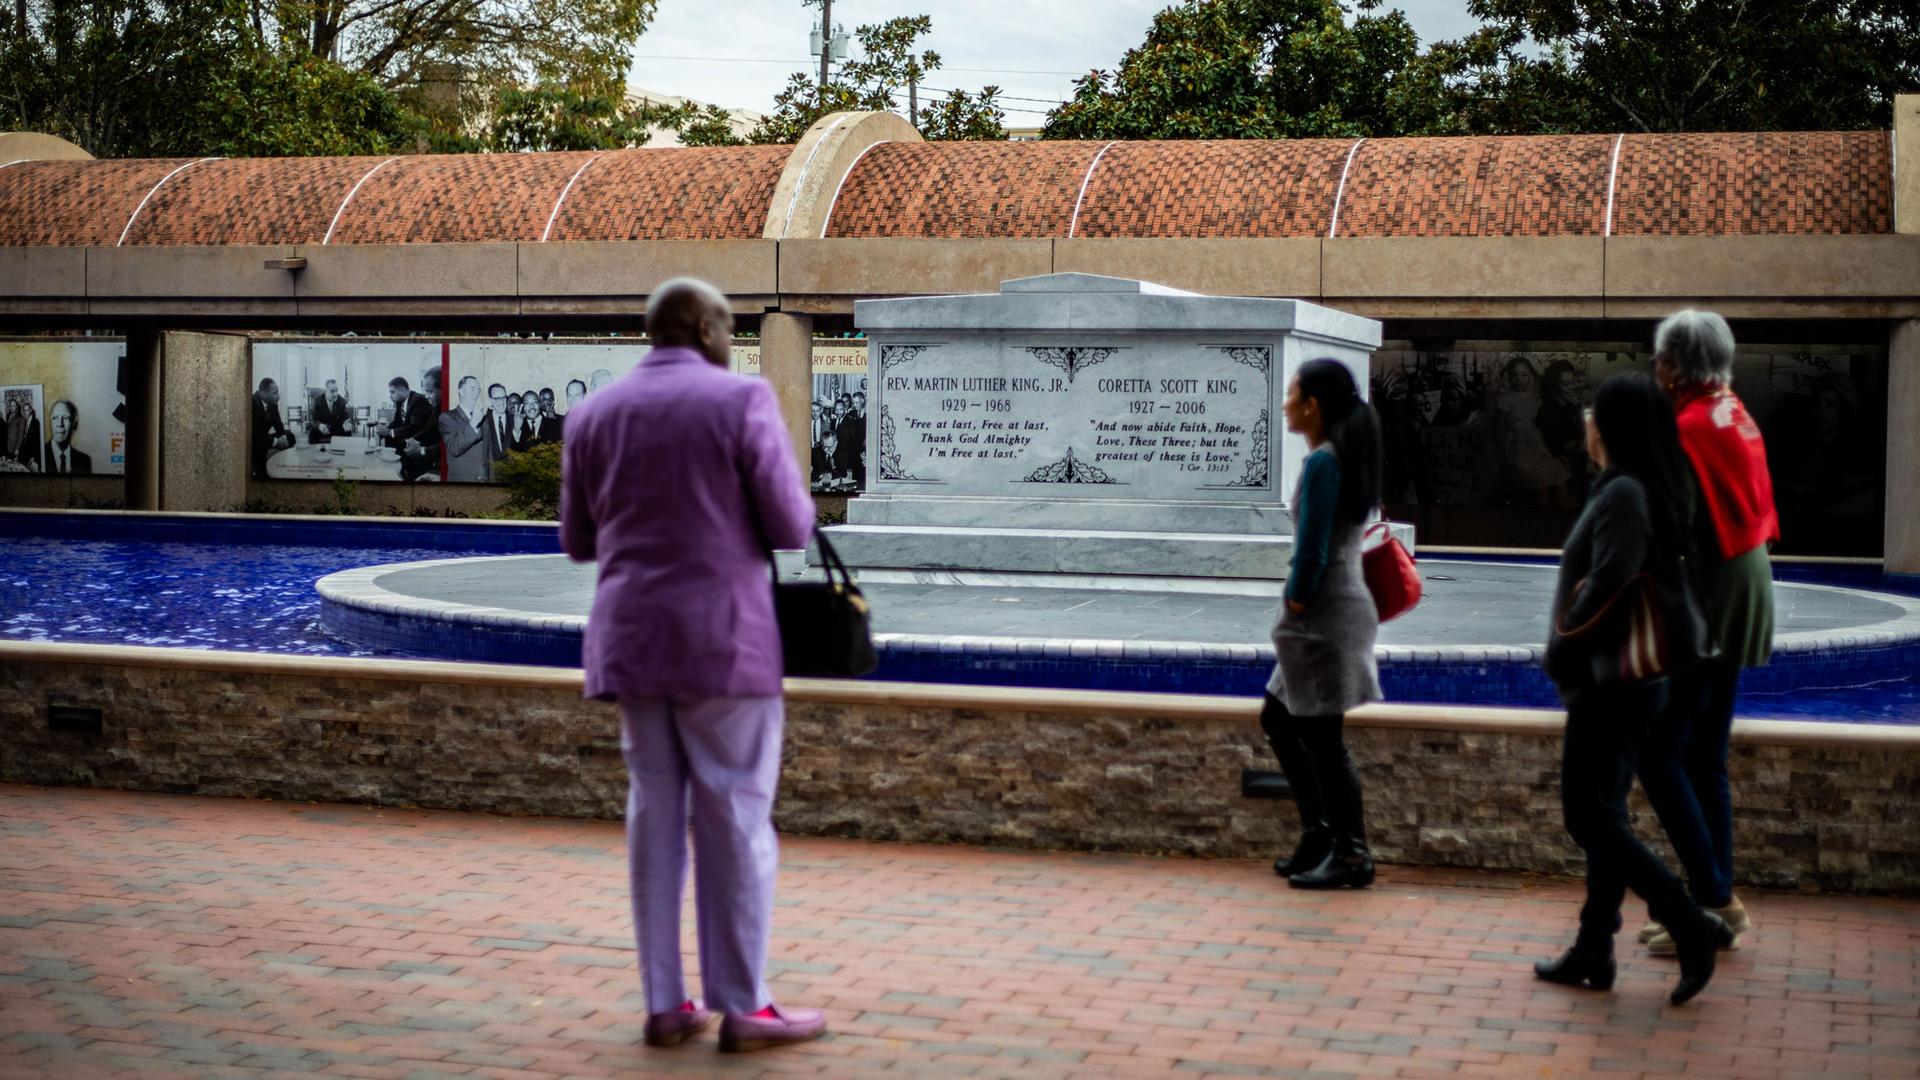 Several people including a man wearing a purple suit, look on at the stone monument for Martin Luther King, Jr. 